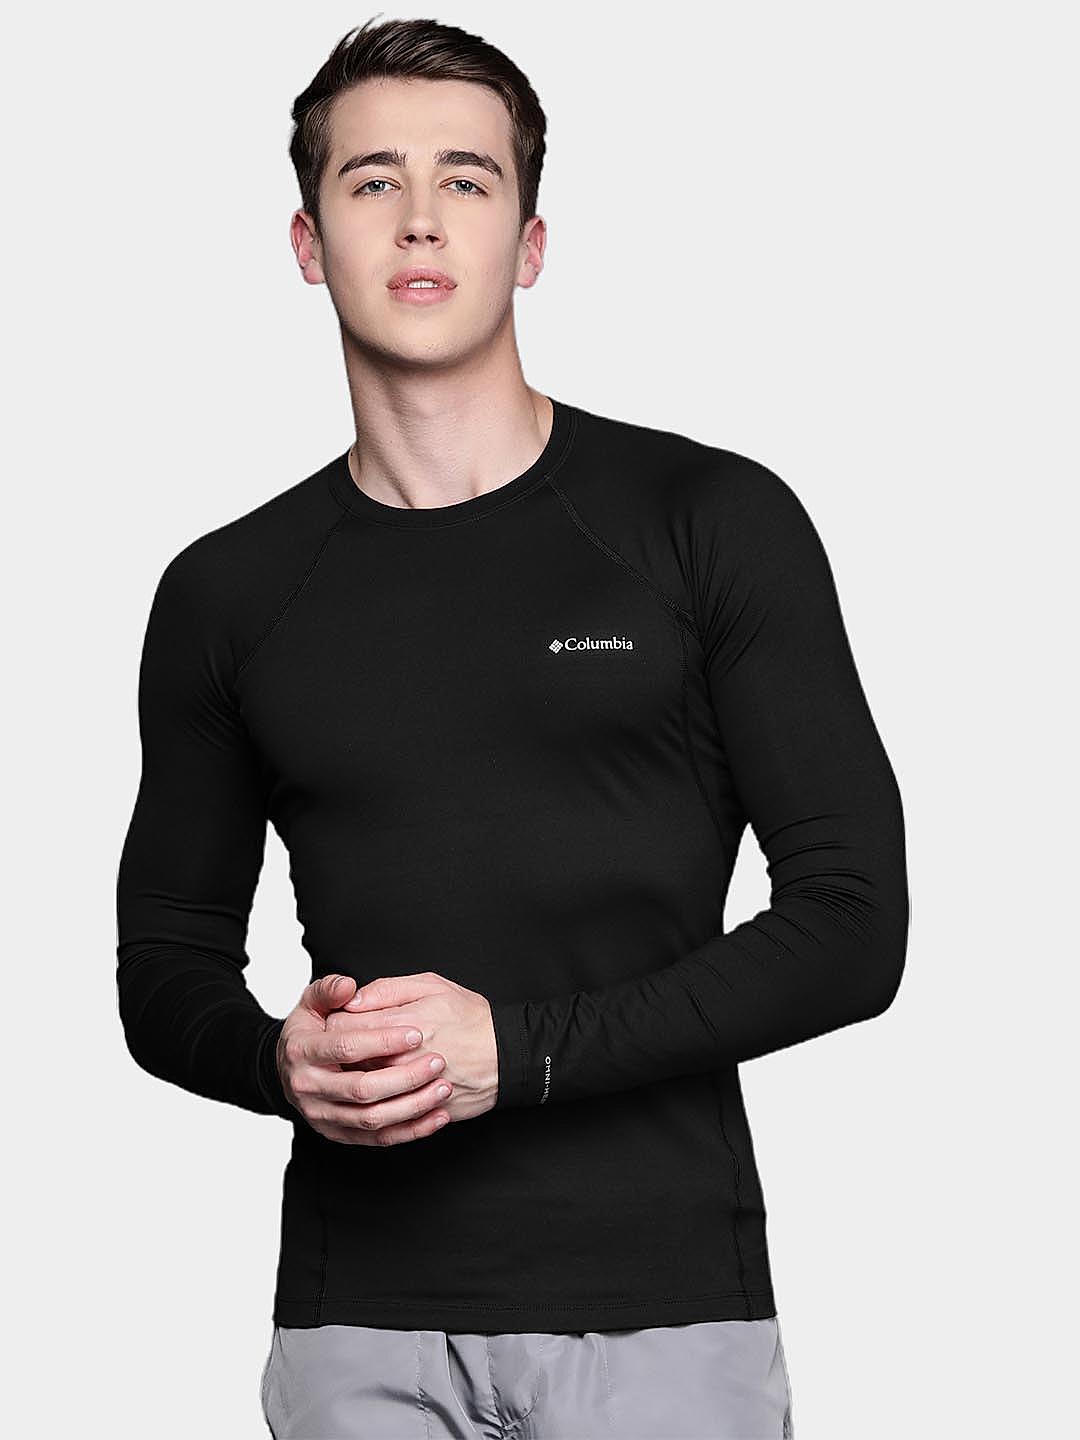 Buy Black Heavyweight Stretch Long Sleeve Top for Men Online at Columbia  Sportswear